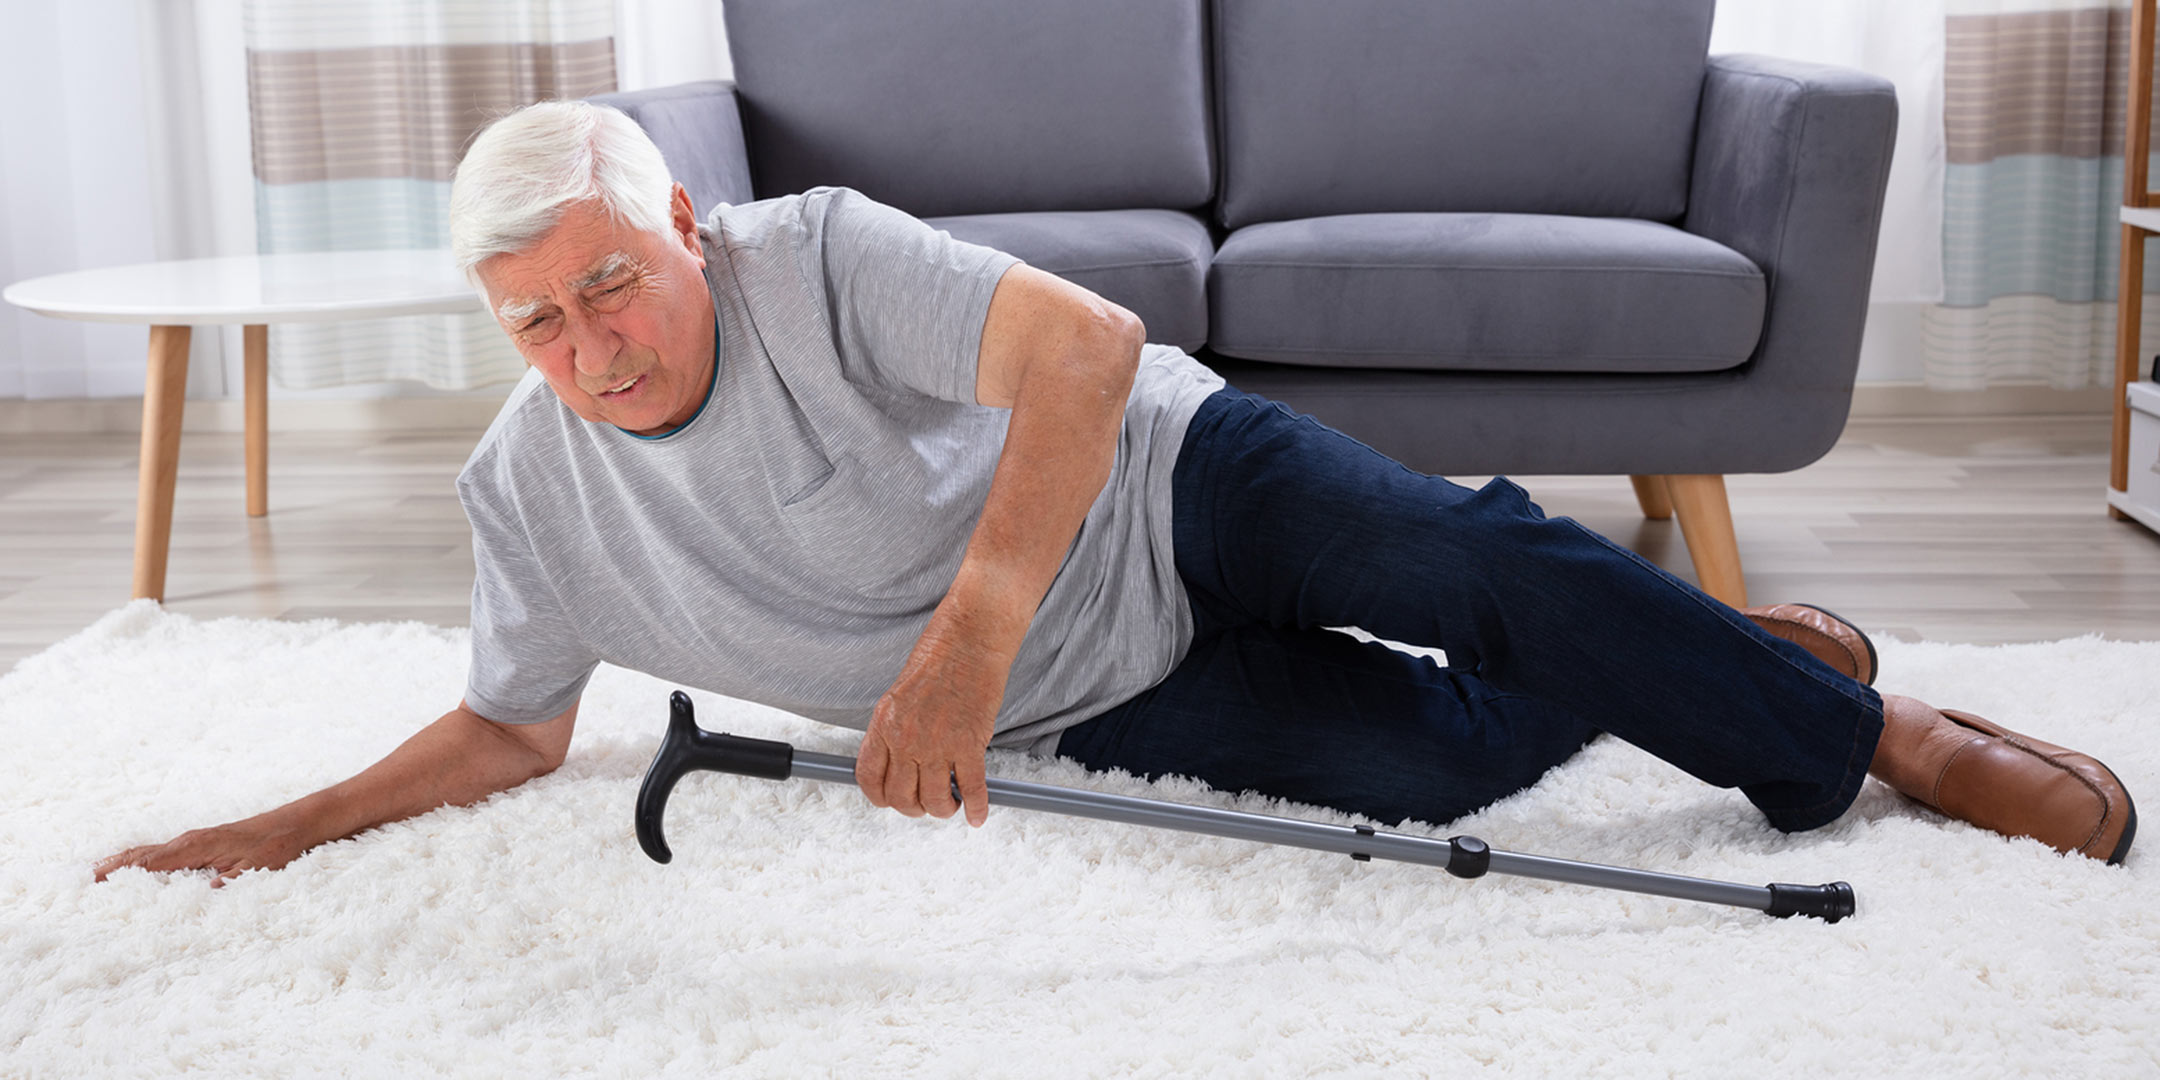 Elderly Falls How To Lower The Risk And Choose An Alert System